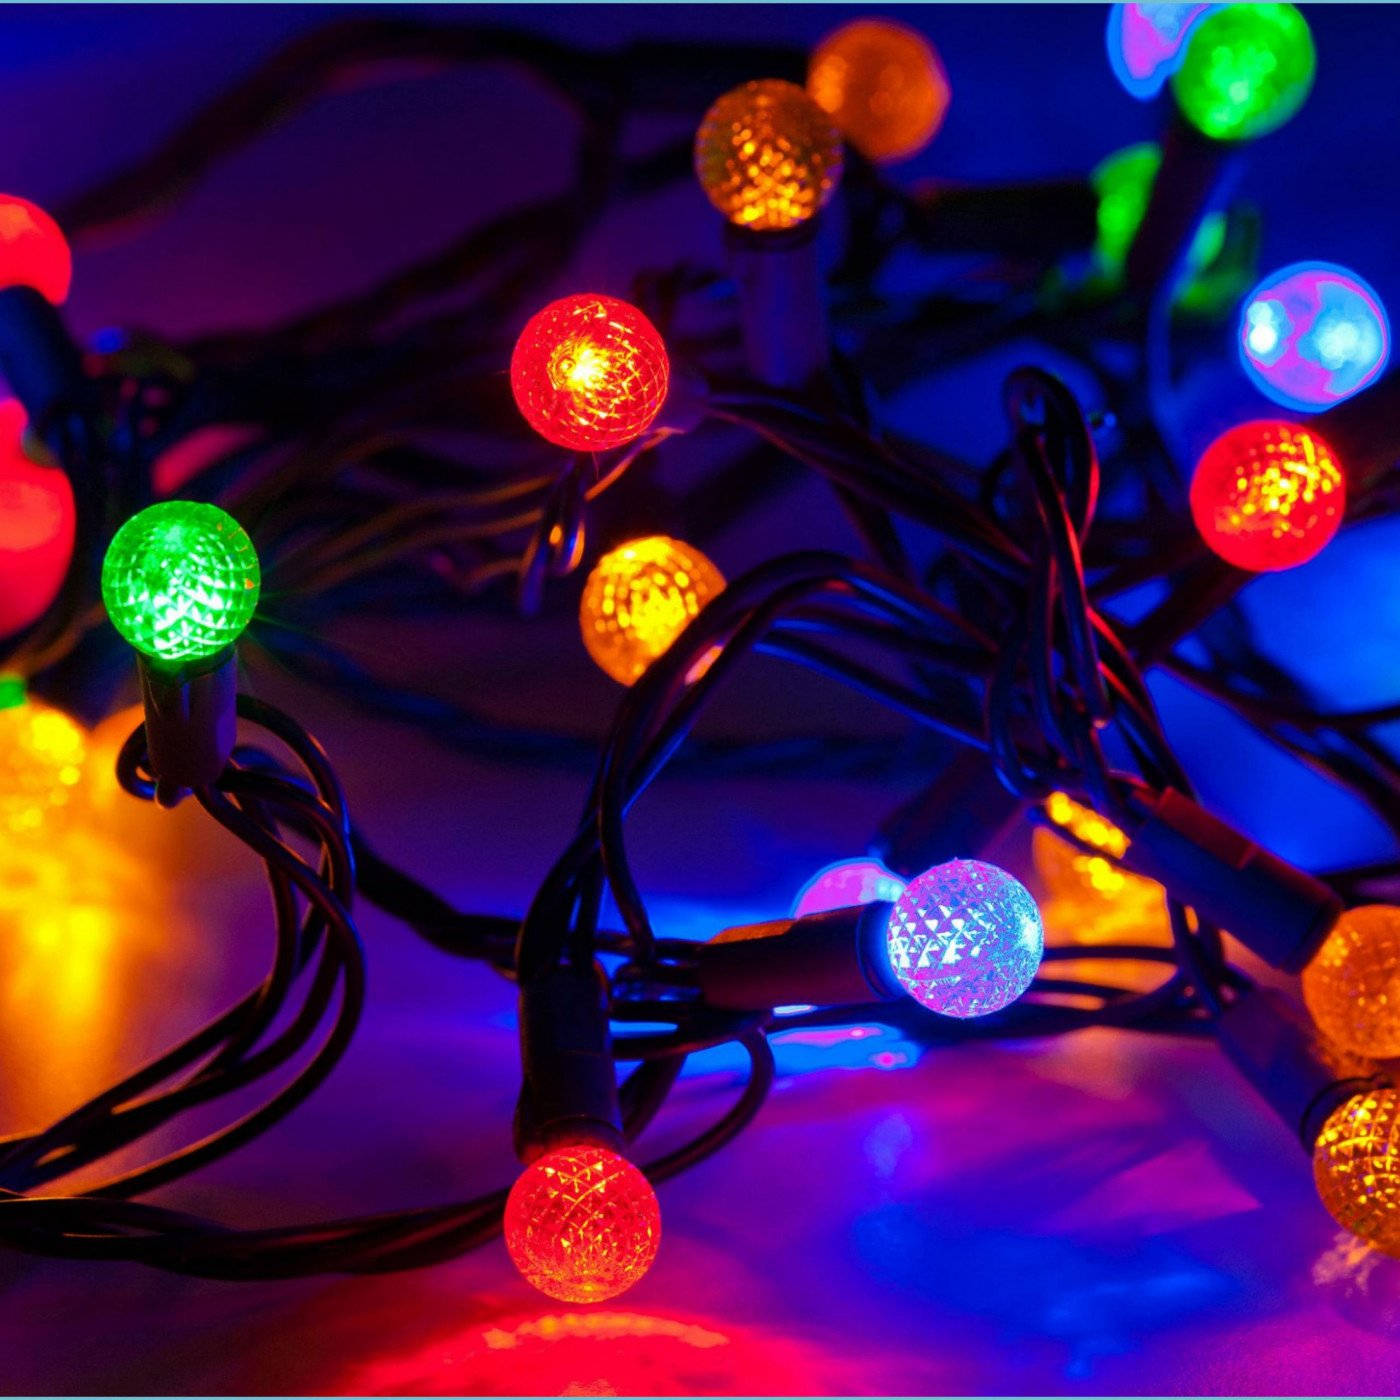 Get into the Christmas spirit and light up your home with this fun and vibrant Christmas lights aesthetic. Wallpaper